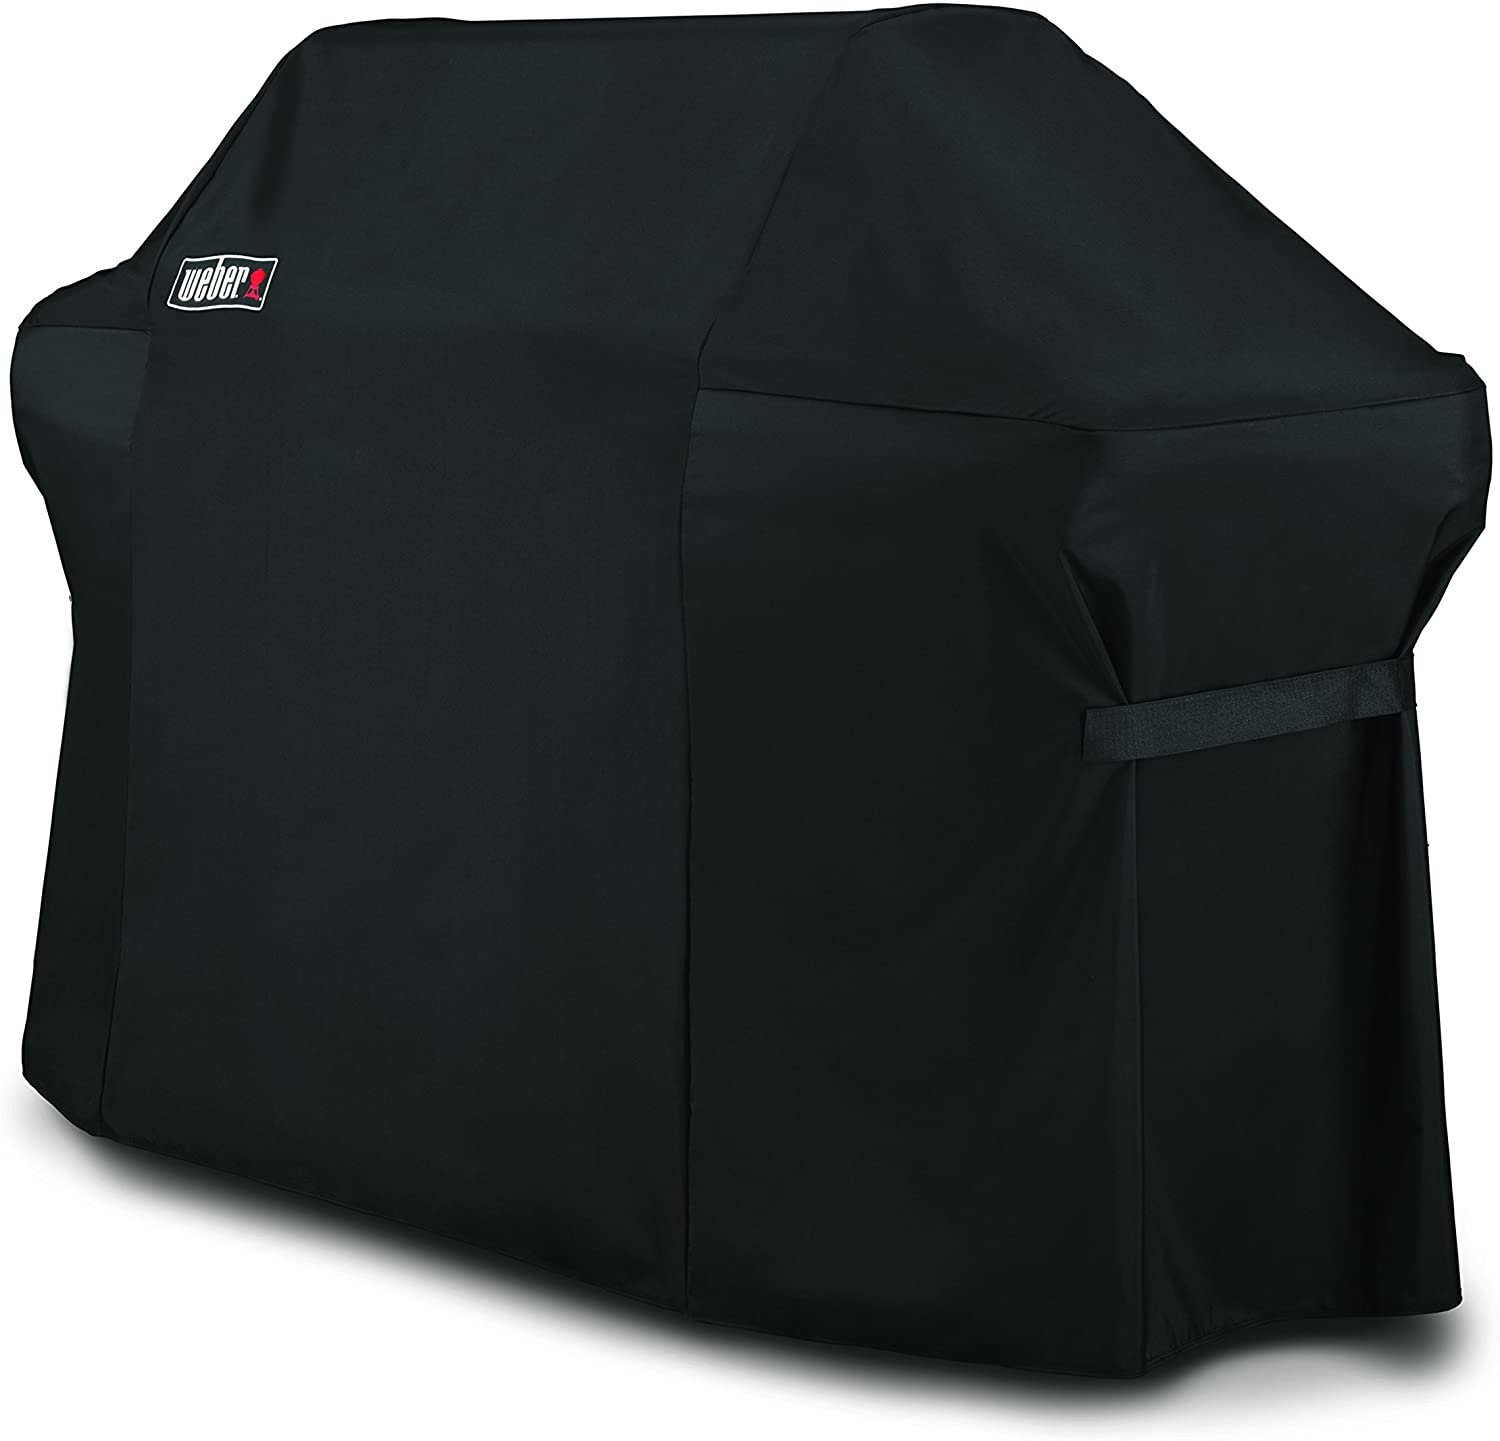 Weber 7109 Grill Cover with Storage Bag for Summit 600-Series Gas Grills,Black - image 3 of 4